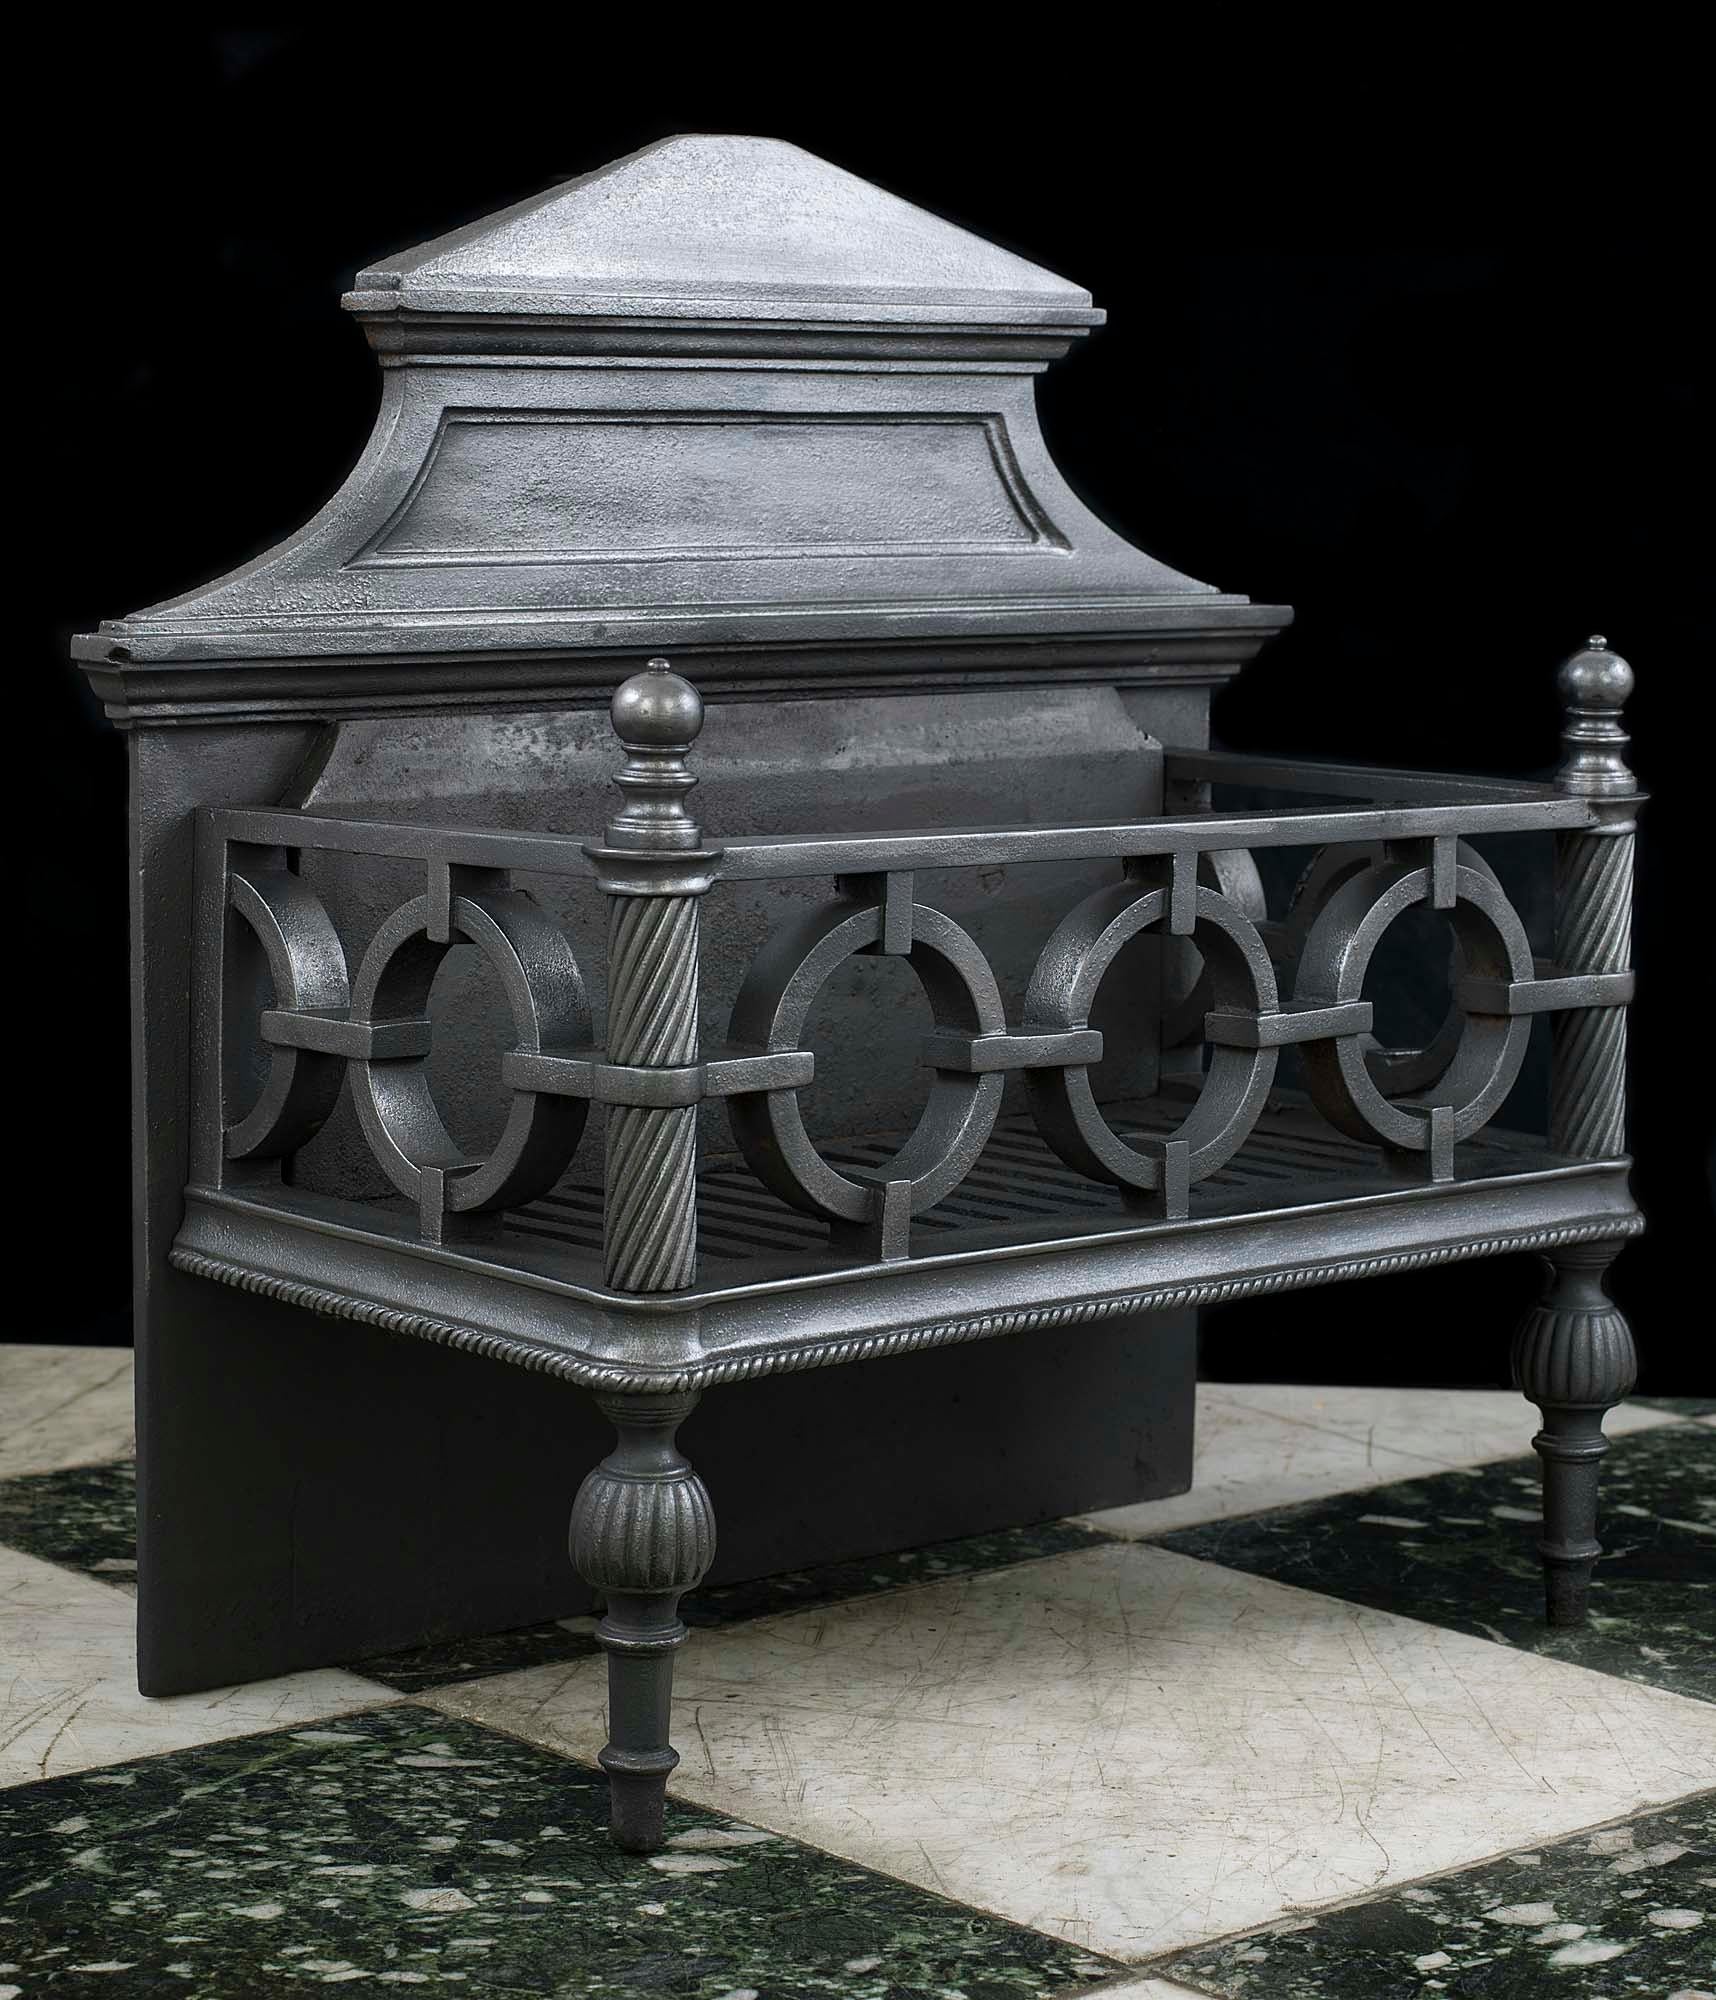 A heavy Regency cast iron fire grate with a pediment backplate, linked circles forming the grate front and sides, sturdy barley twist standards topped by small round finials and terminating in reeded bulbous, pegged feet, English, circa 1830.
   